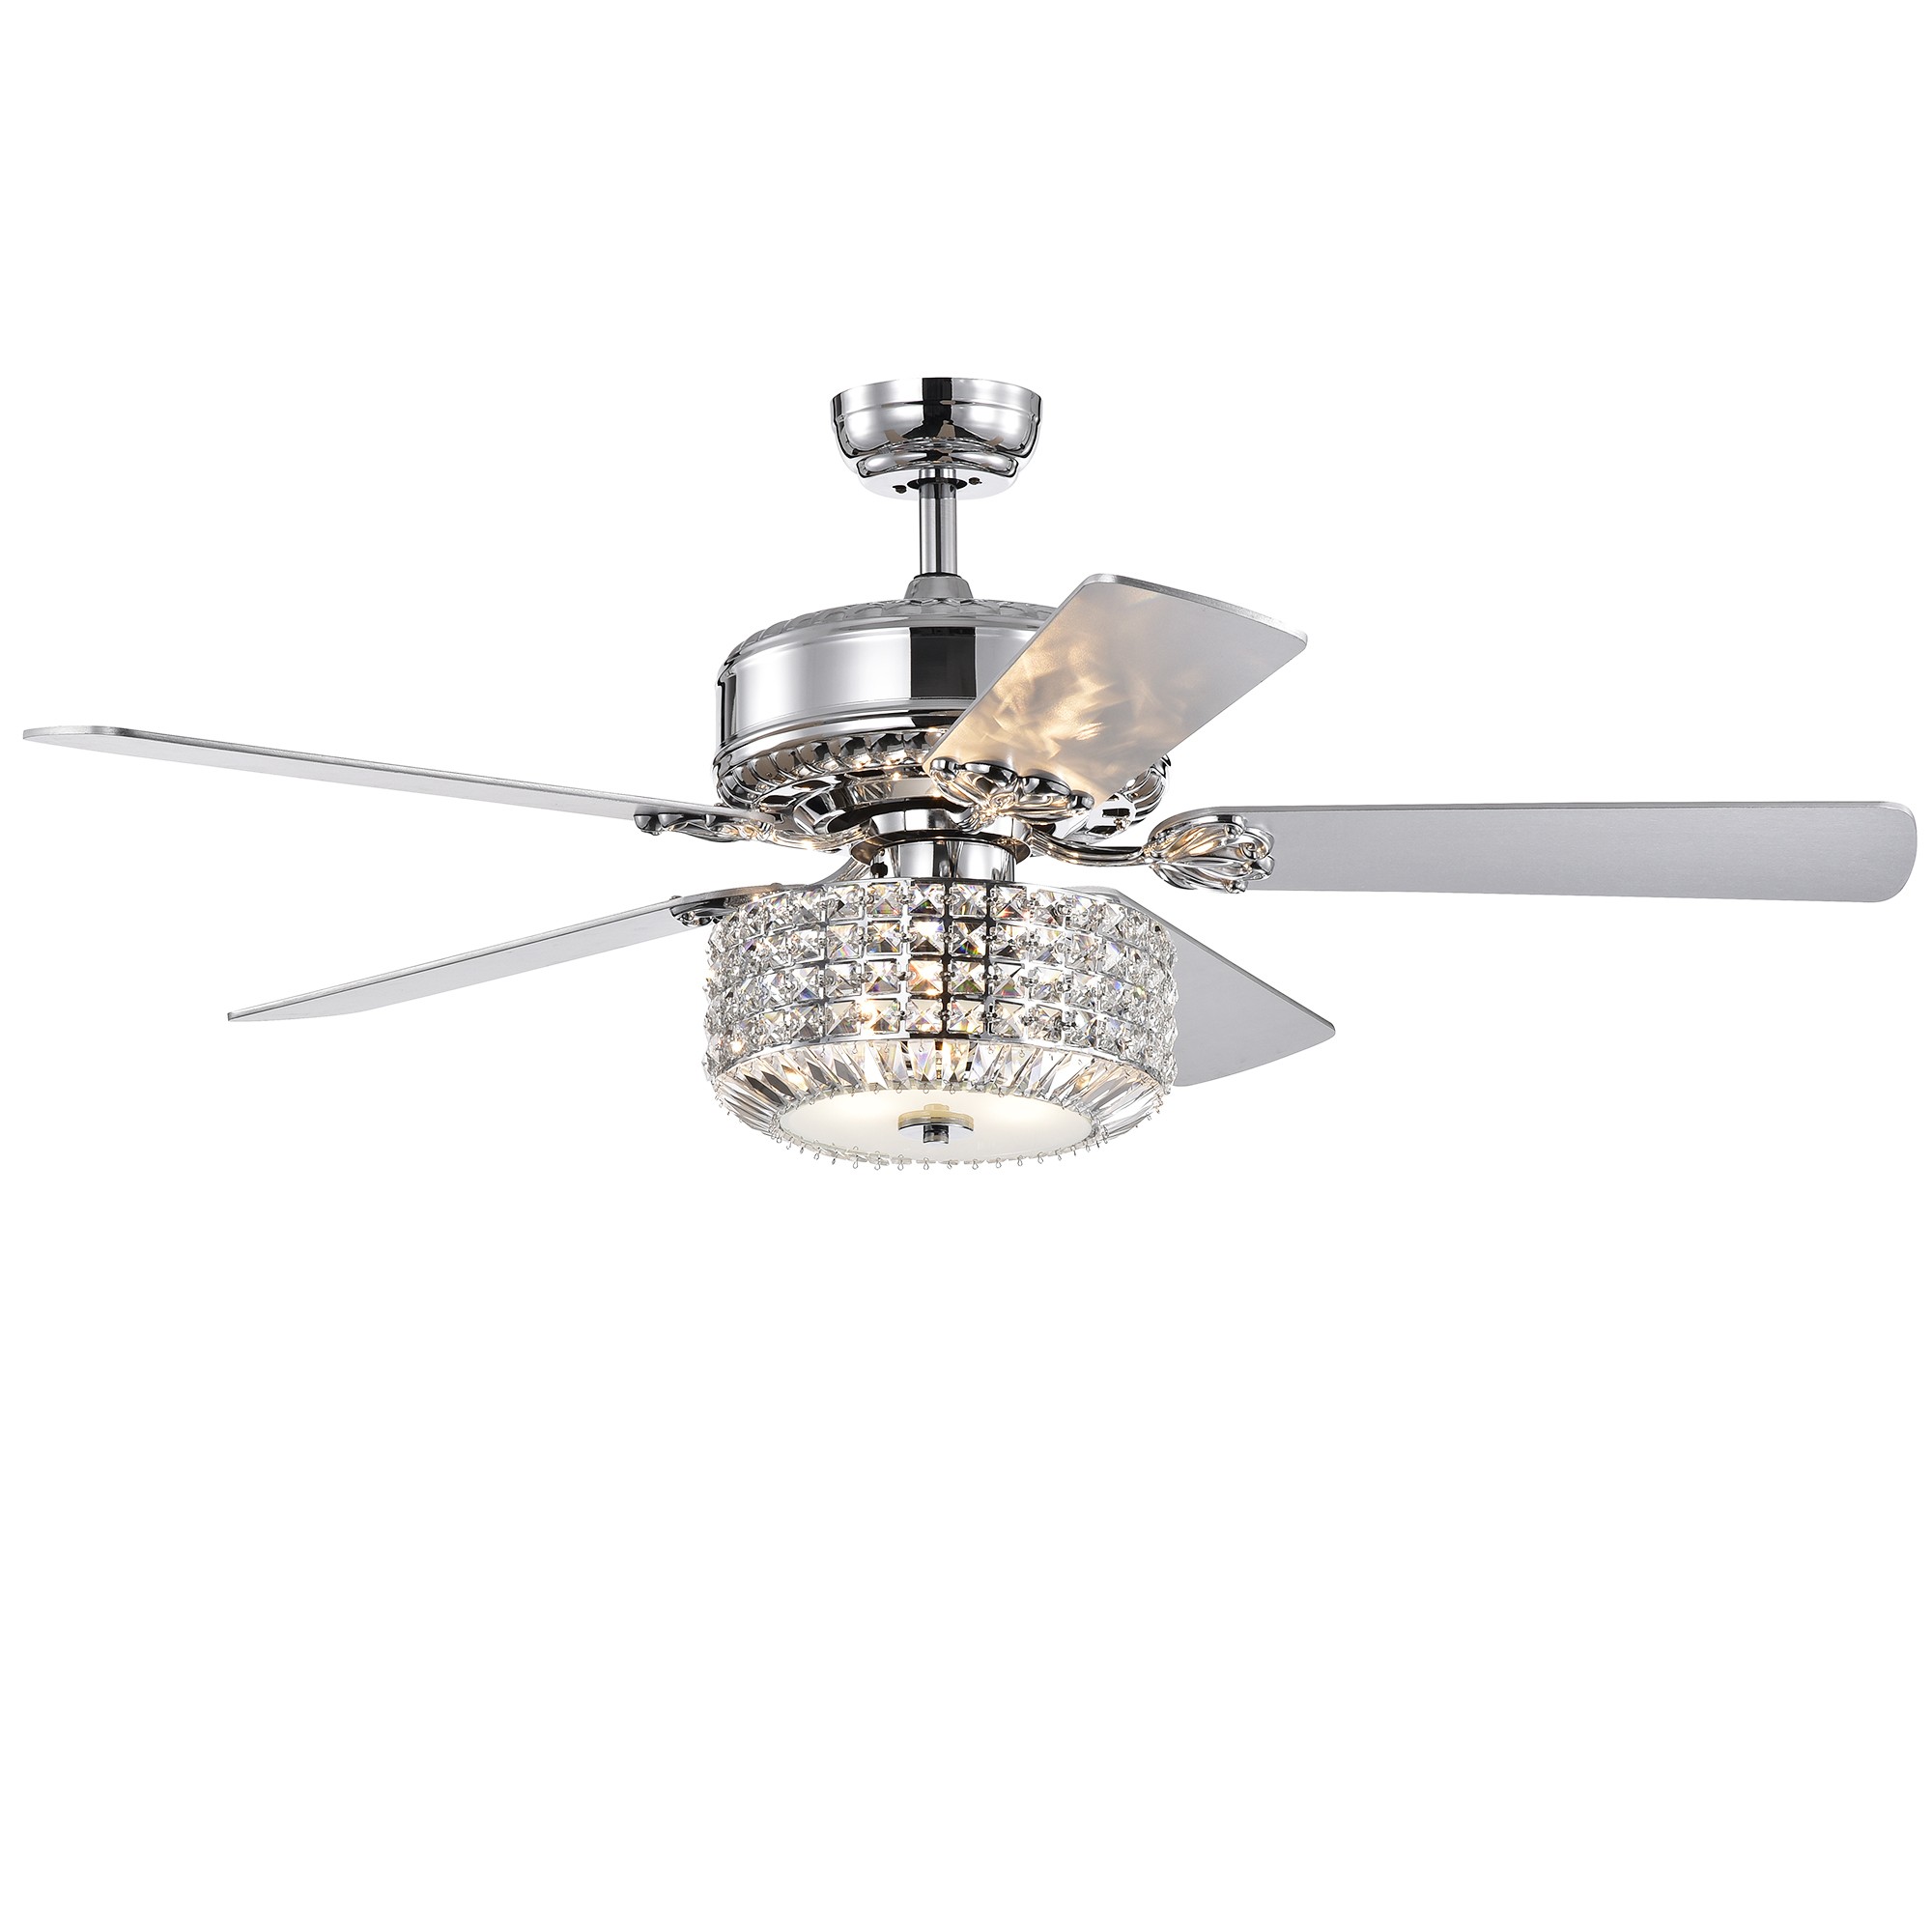 Copper Grove Simitli Remote Control Reversible Blade Chrome 52-inch Lighted Ceiling Fan with Crystal Shade